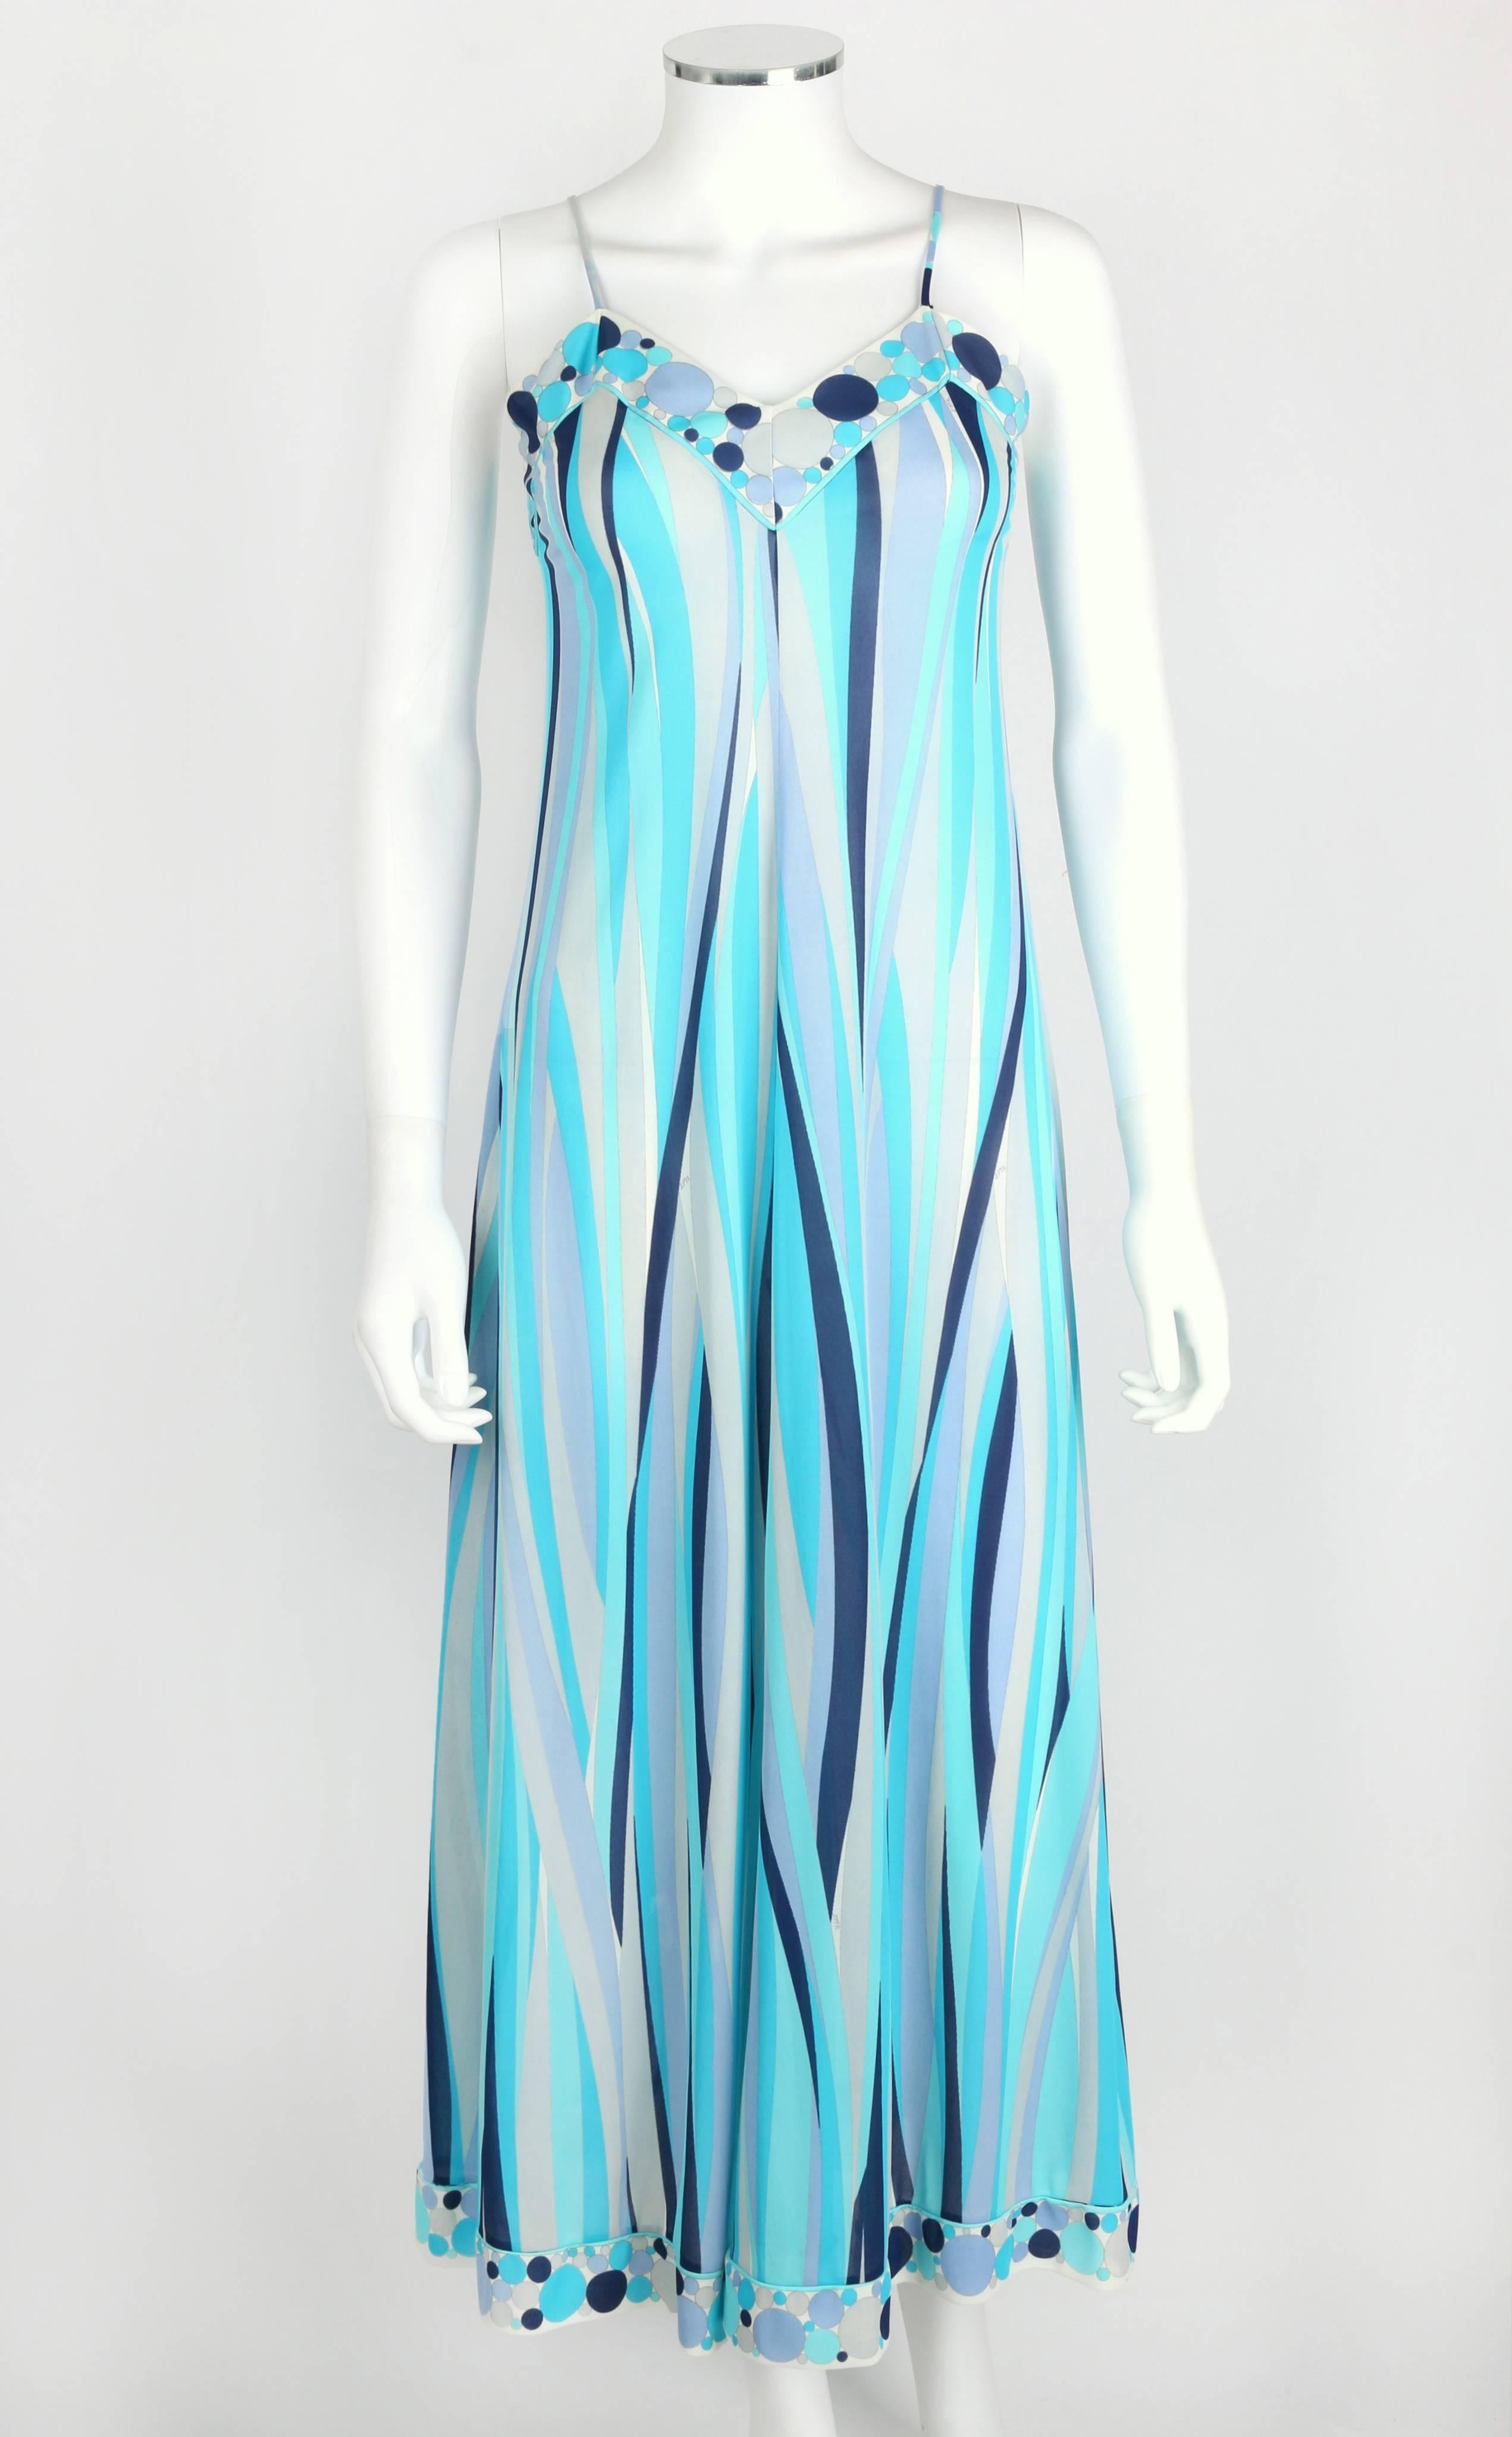 Vintage c.1960s Emilio Pucci for Formfit Rogers two piece maxi dress/lounge set in shades of blue and gray. Spaghetti strap slip dress. Circle decorative border on v-neckline and hem. Over-dress has long raglan sleeves with button detail at cuff.